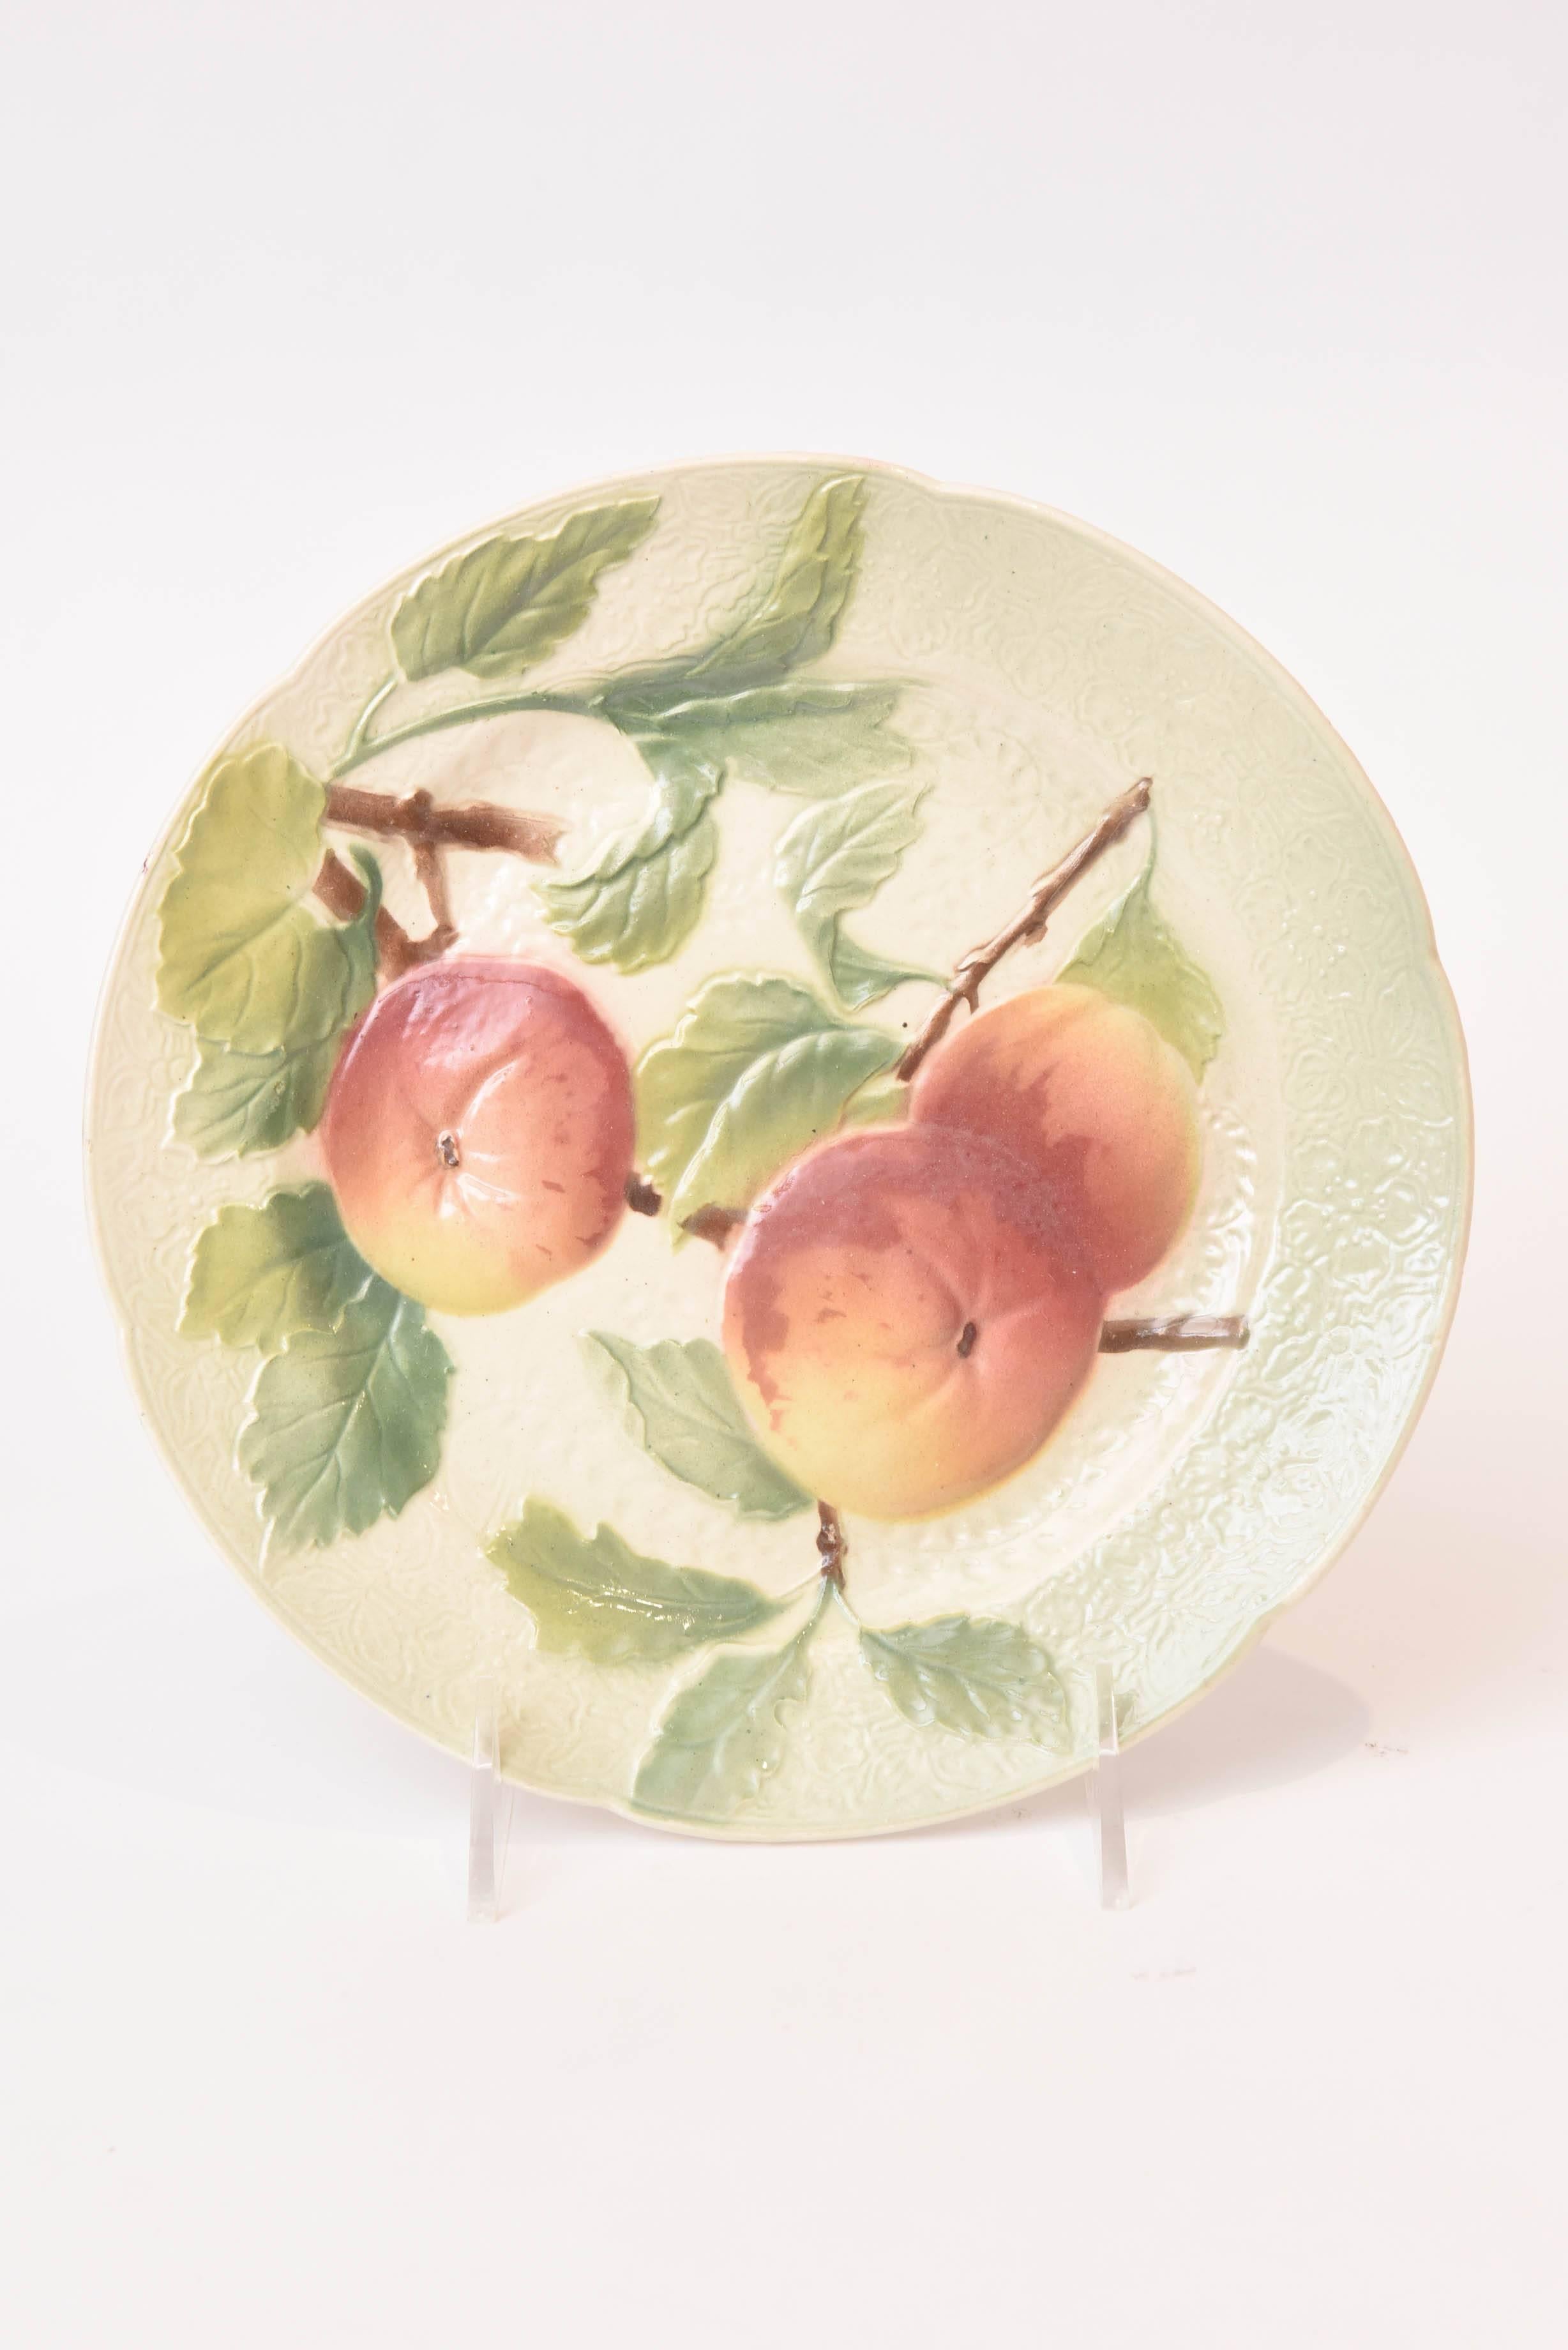 A charming set of two fruit plates featuring sculpted peaches with full leaf and branch details on a textured green back ground. Hall marked.
Please inquire for similar fruit plates as we stock much decorative Majolica.